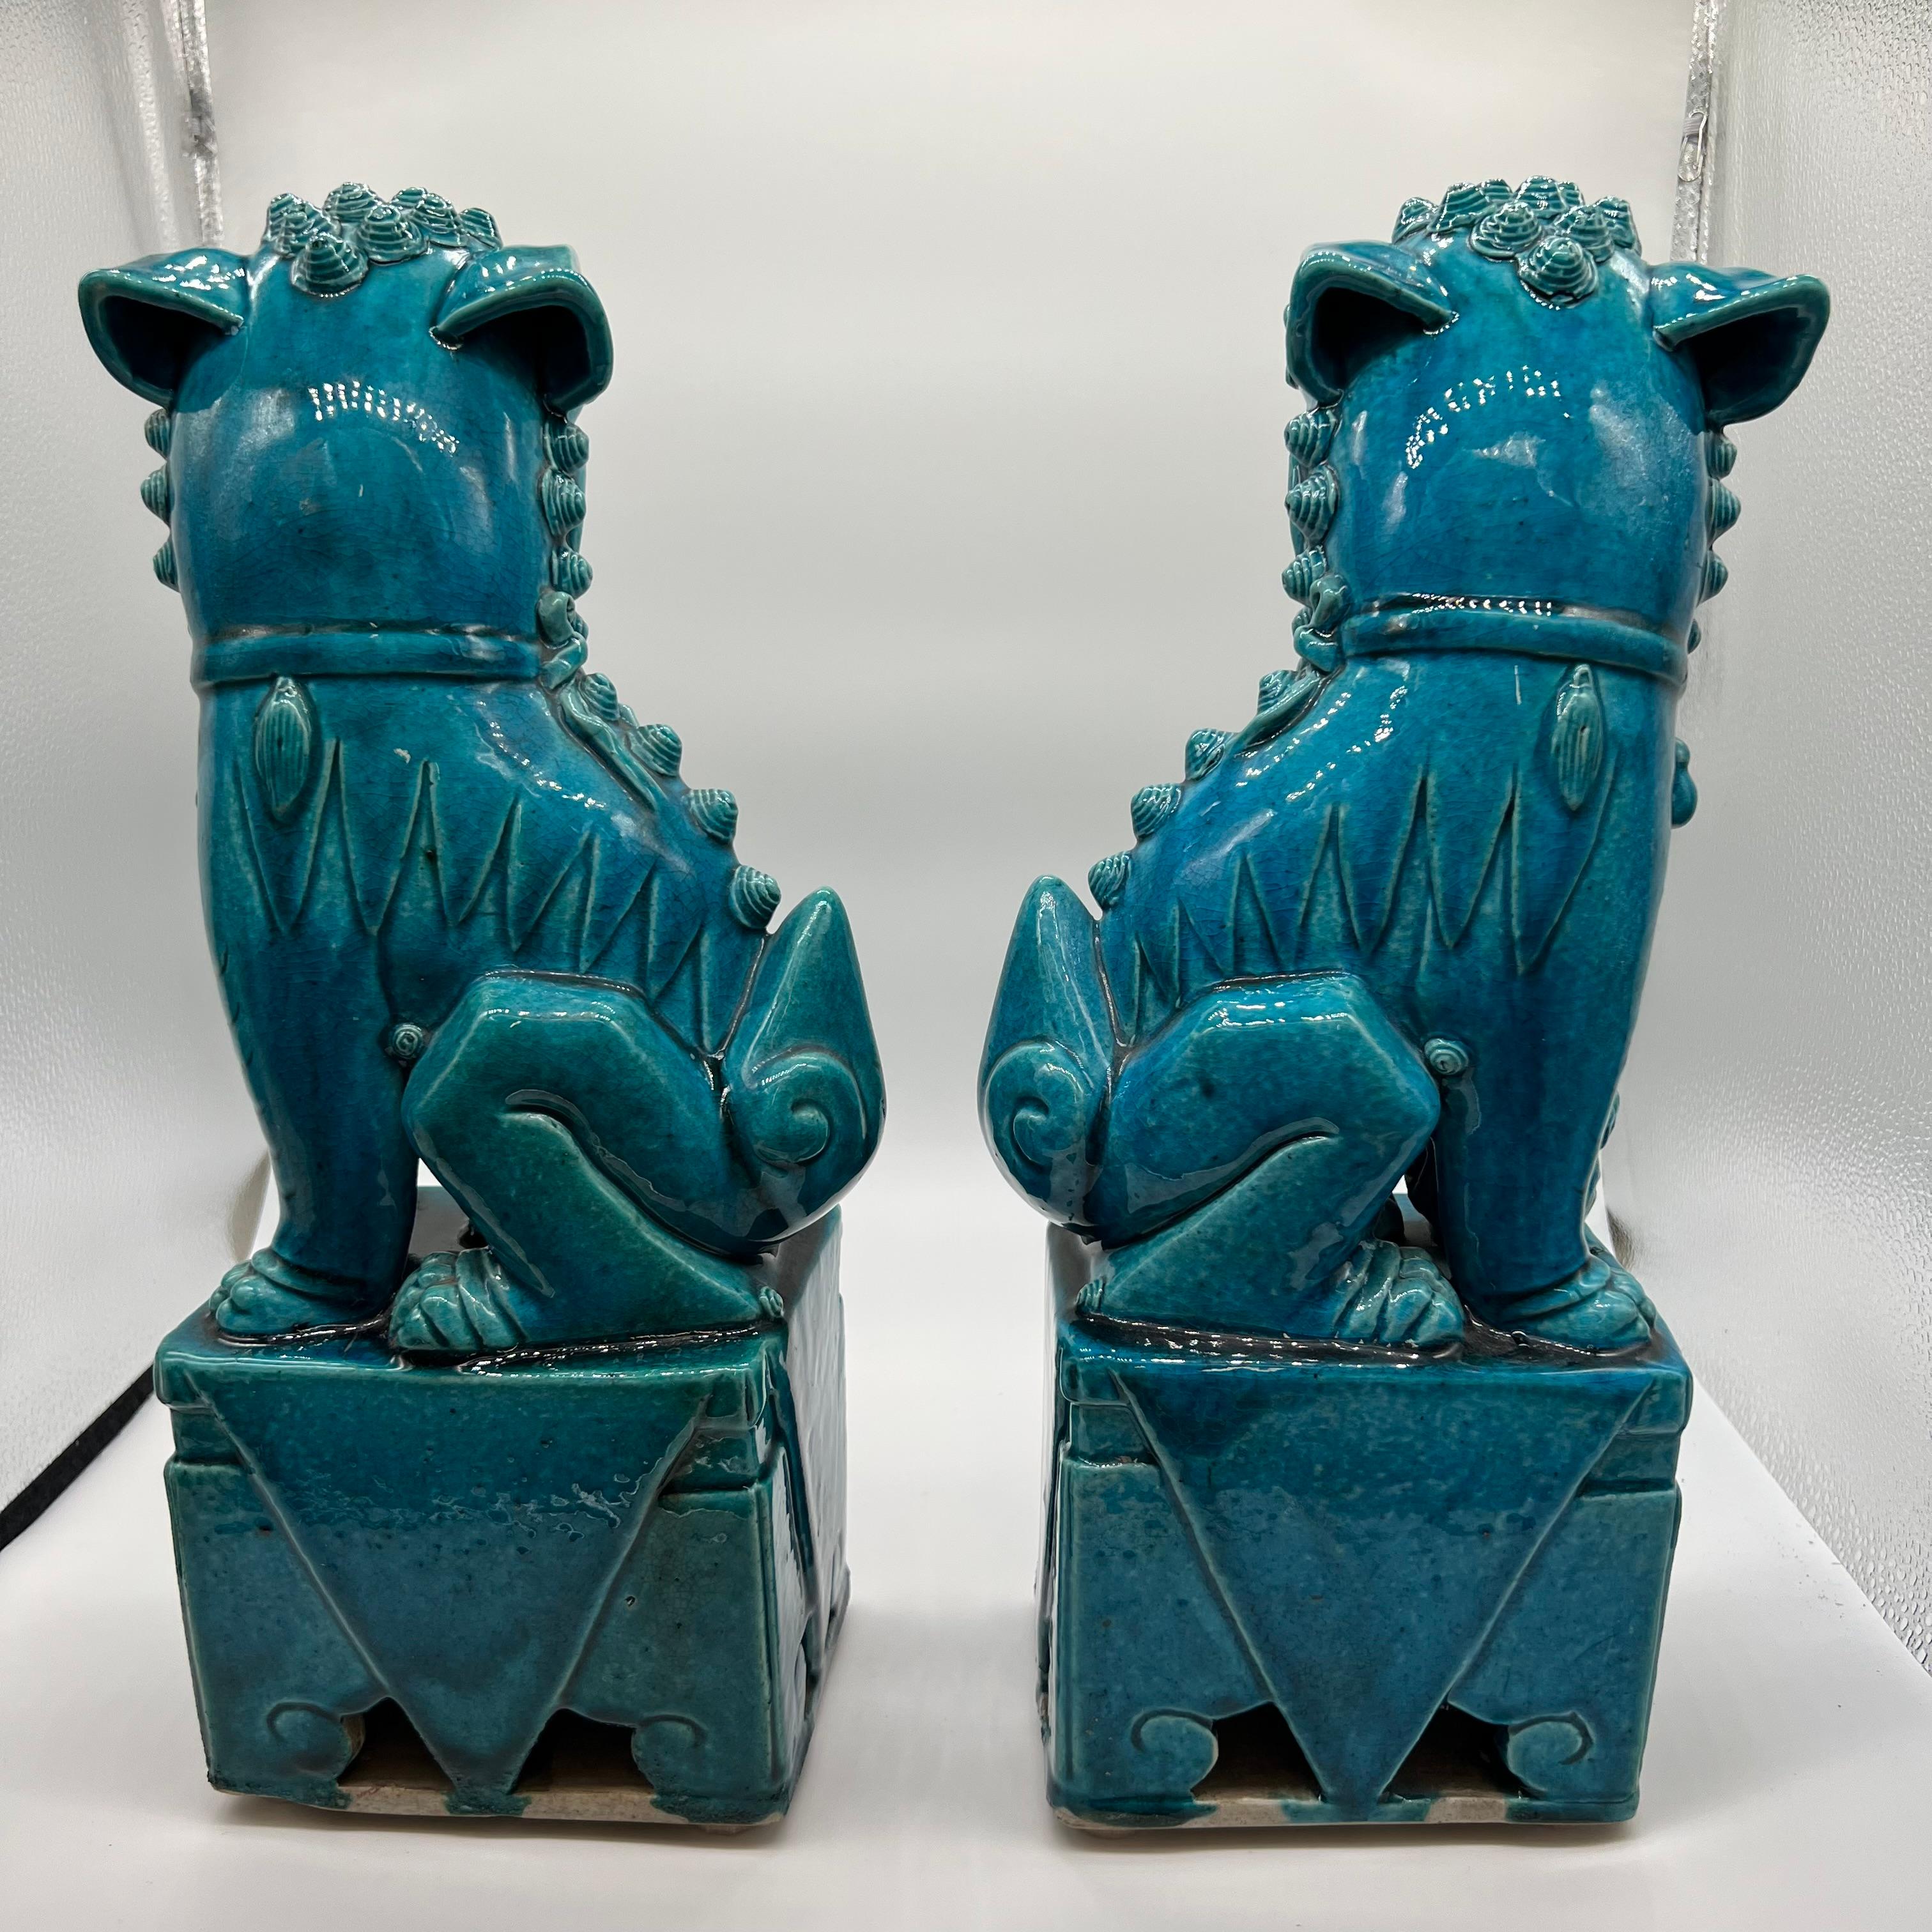 A wonderful pair of turquoise glazed Chinese Foo dog statues- circa 1880. Foo dogs were actually lions, yet they resemble a Chow Chow and/or Shih Tzu (dog breeds) which led them to be called foo dogs or fu dogs. Foo dogs were originally displayed